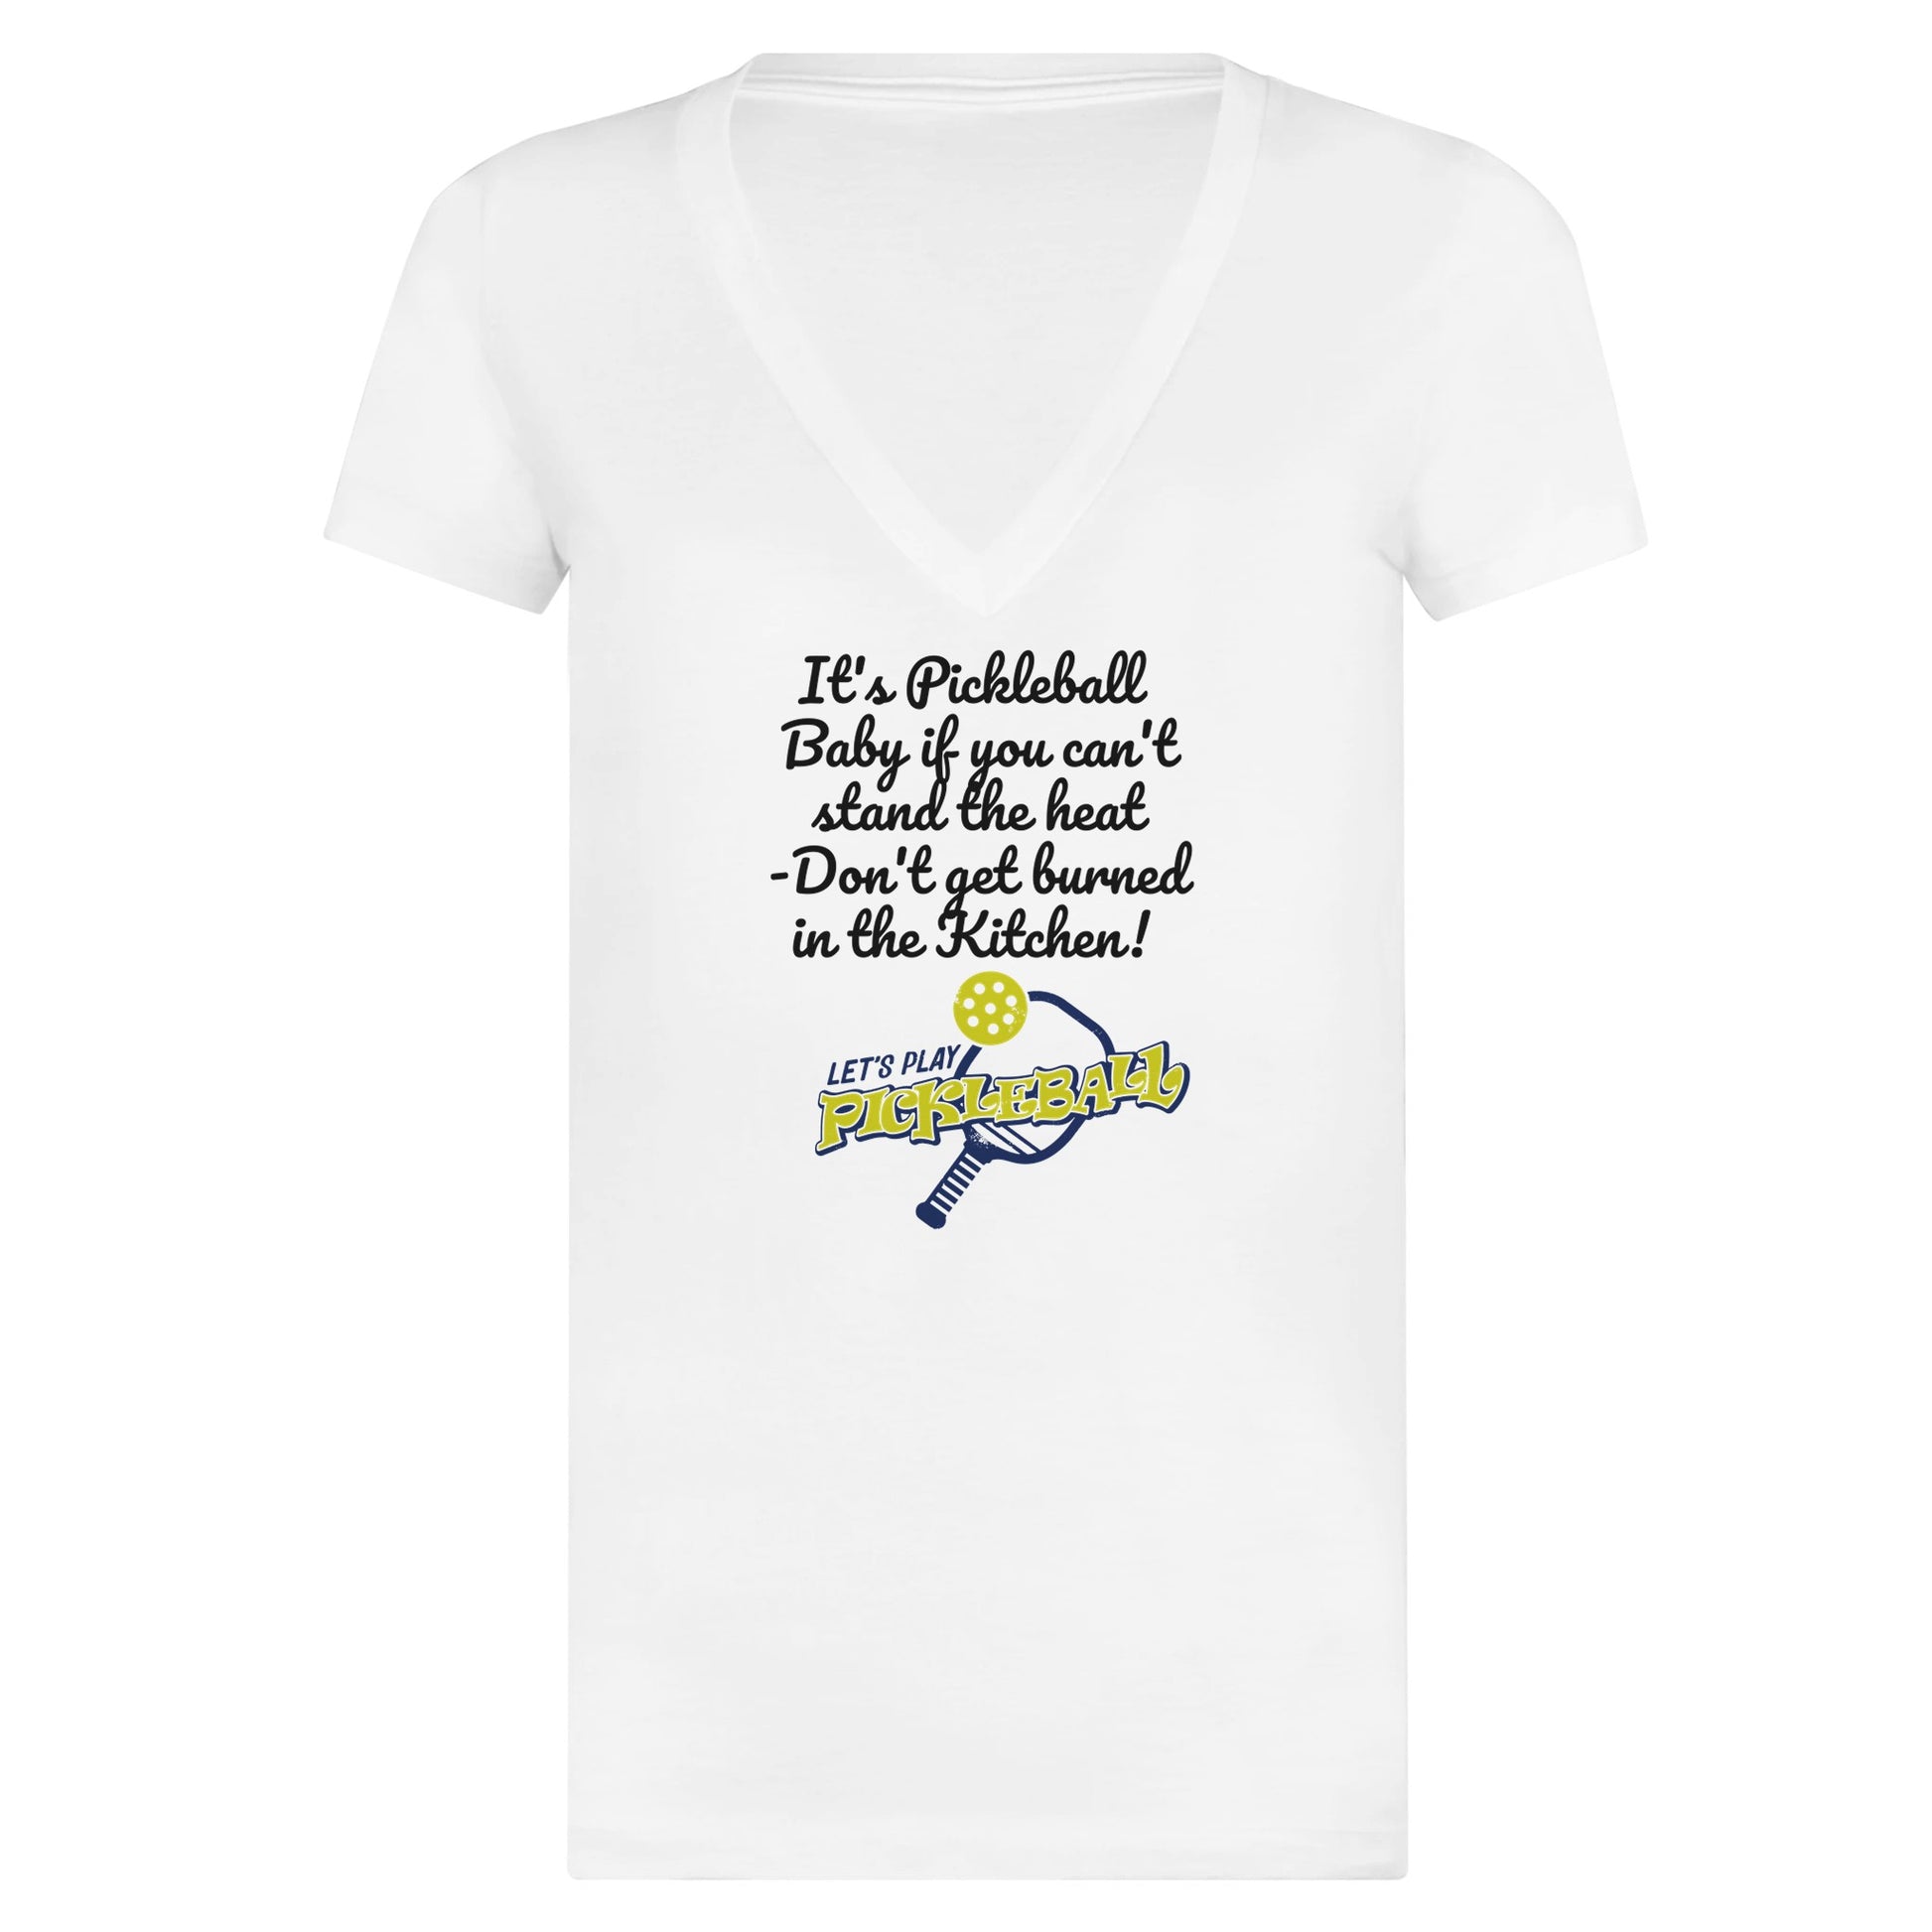 A premium women’s V-neck t-shirt with original logo It's Pickleball Baby if you can't stand the heat - Don't get burned in the Kitchen and Let's Play Pickleball on front from WhatYa Say Apparel made from combed and ring-spun cotton lying flat.